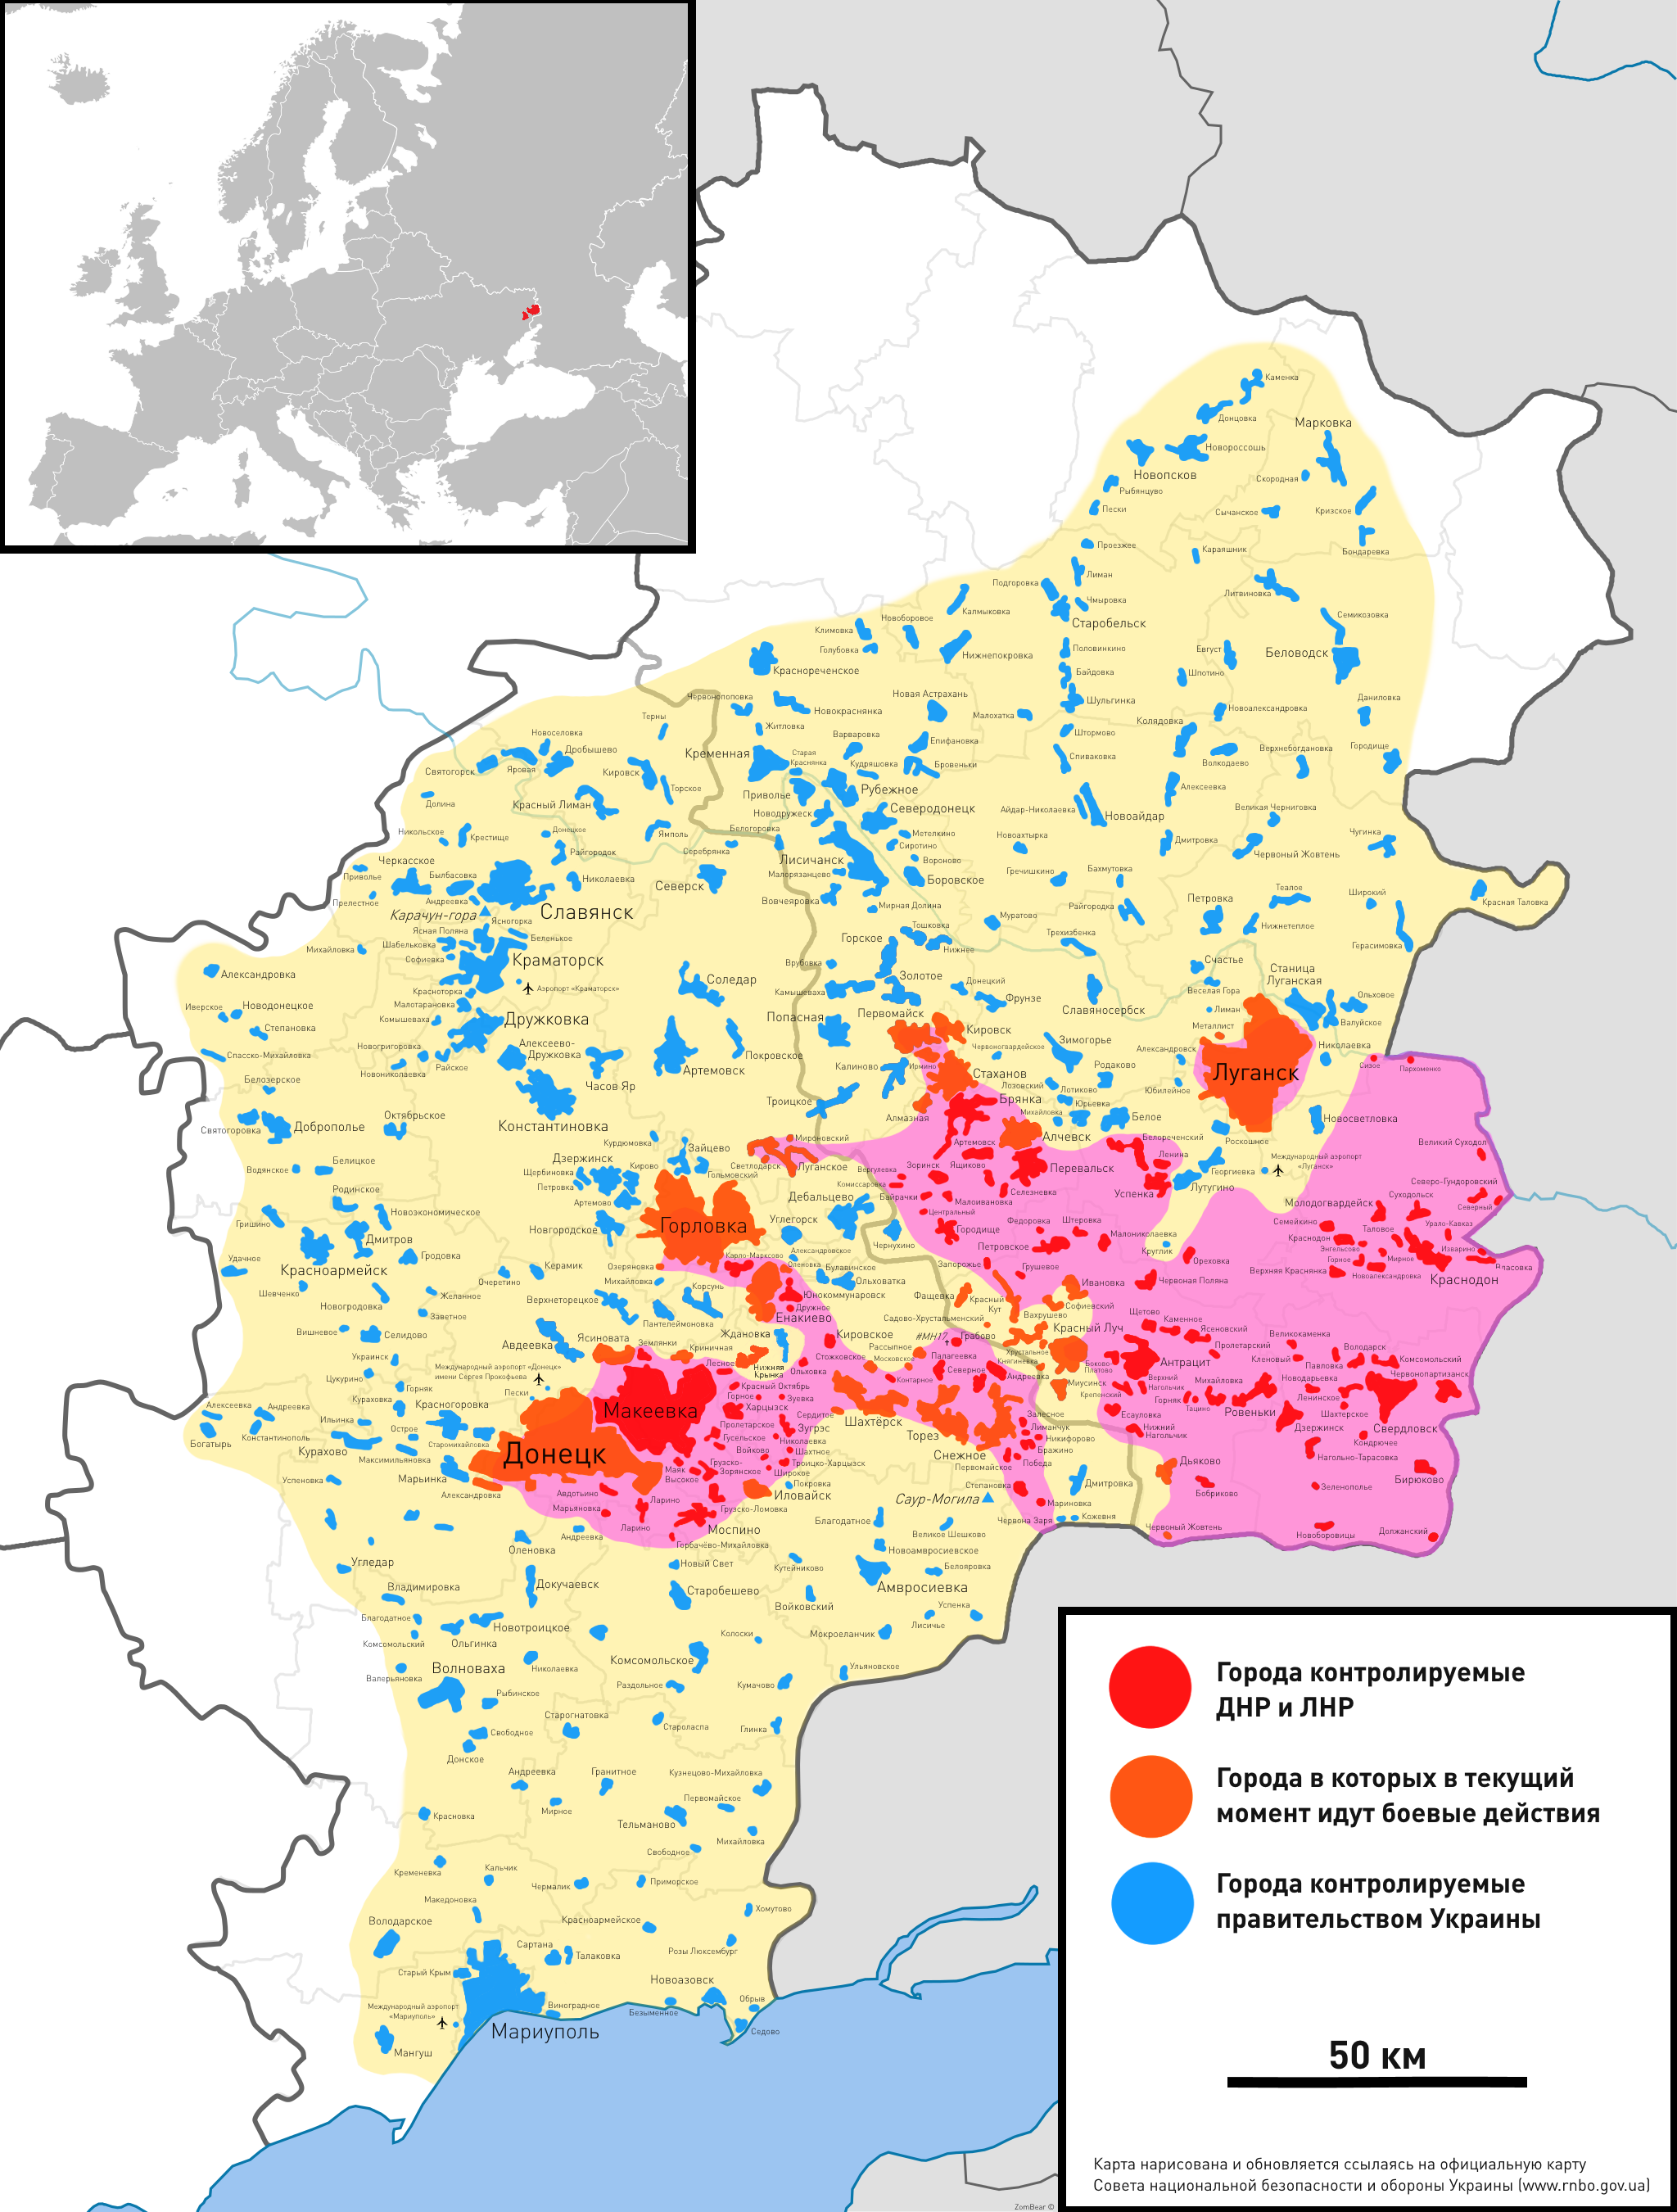 http://upload.wikimedia.org/wikipedia/commons/b/b0/East_Ukraine_conflict.png